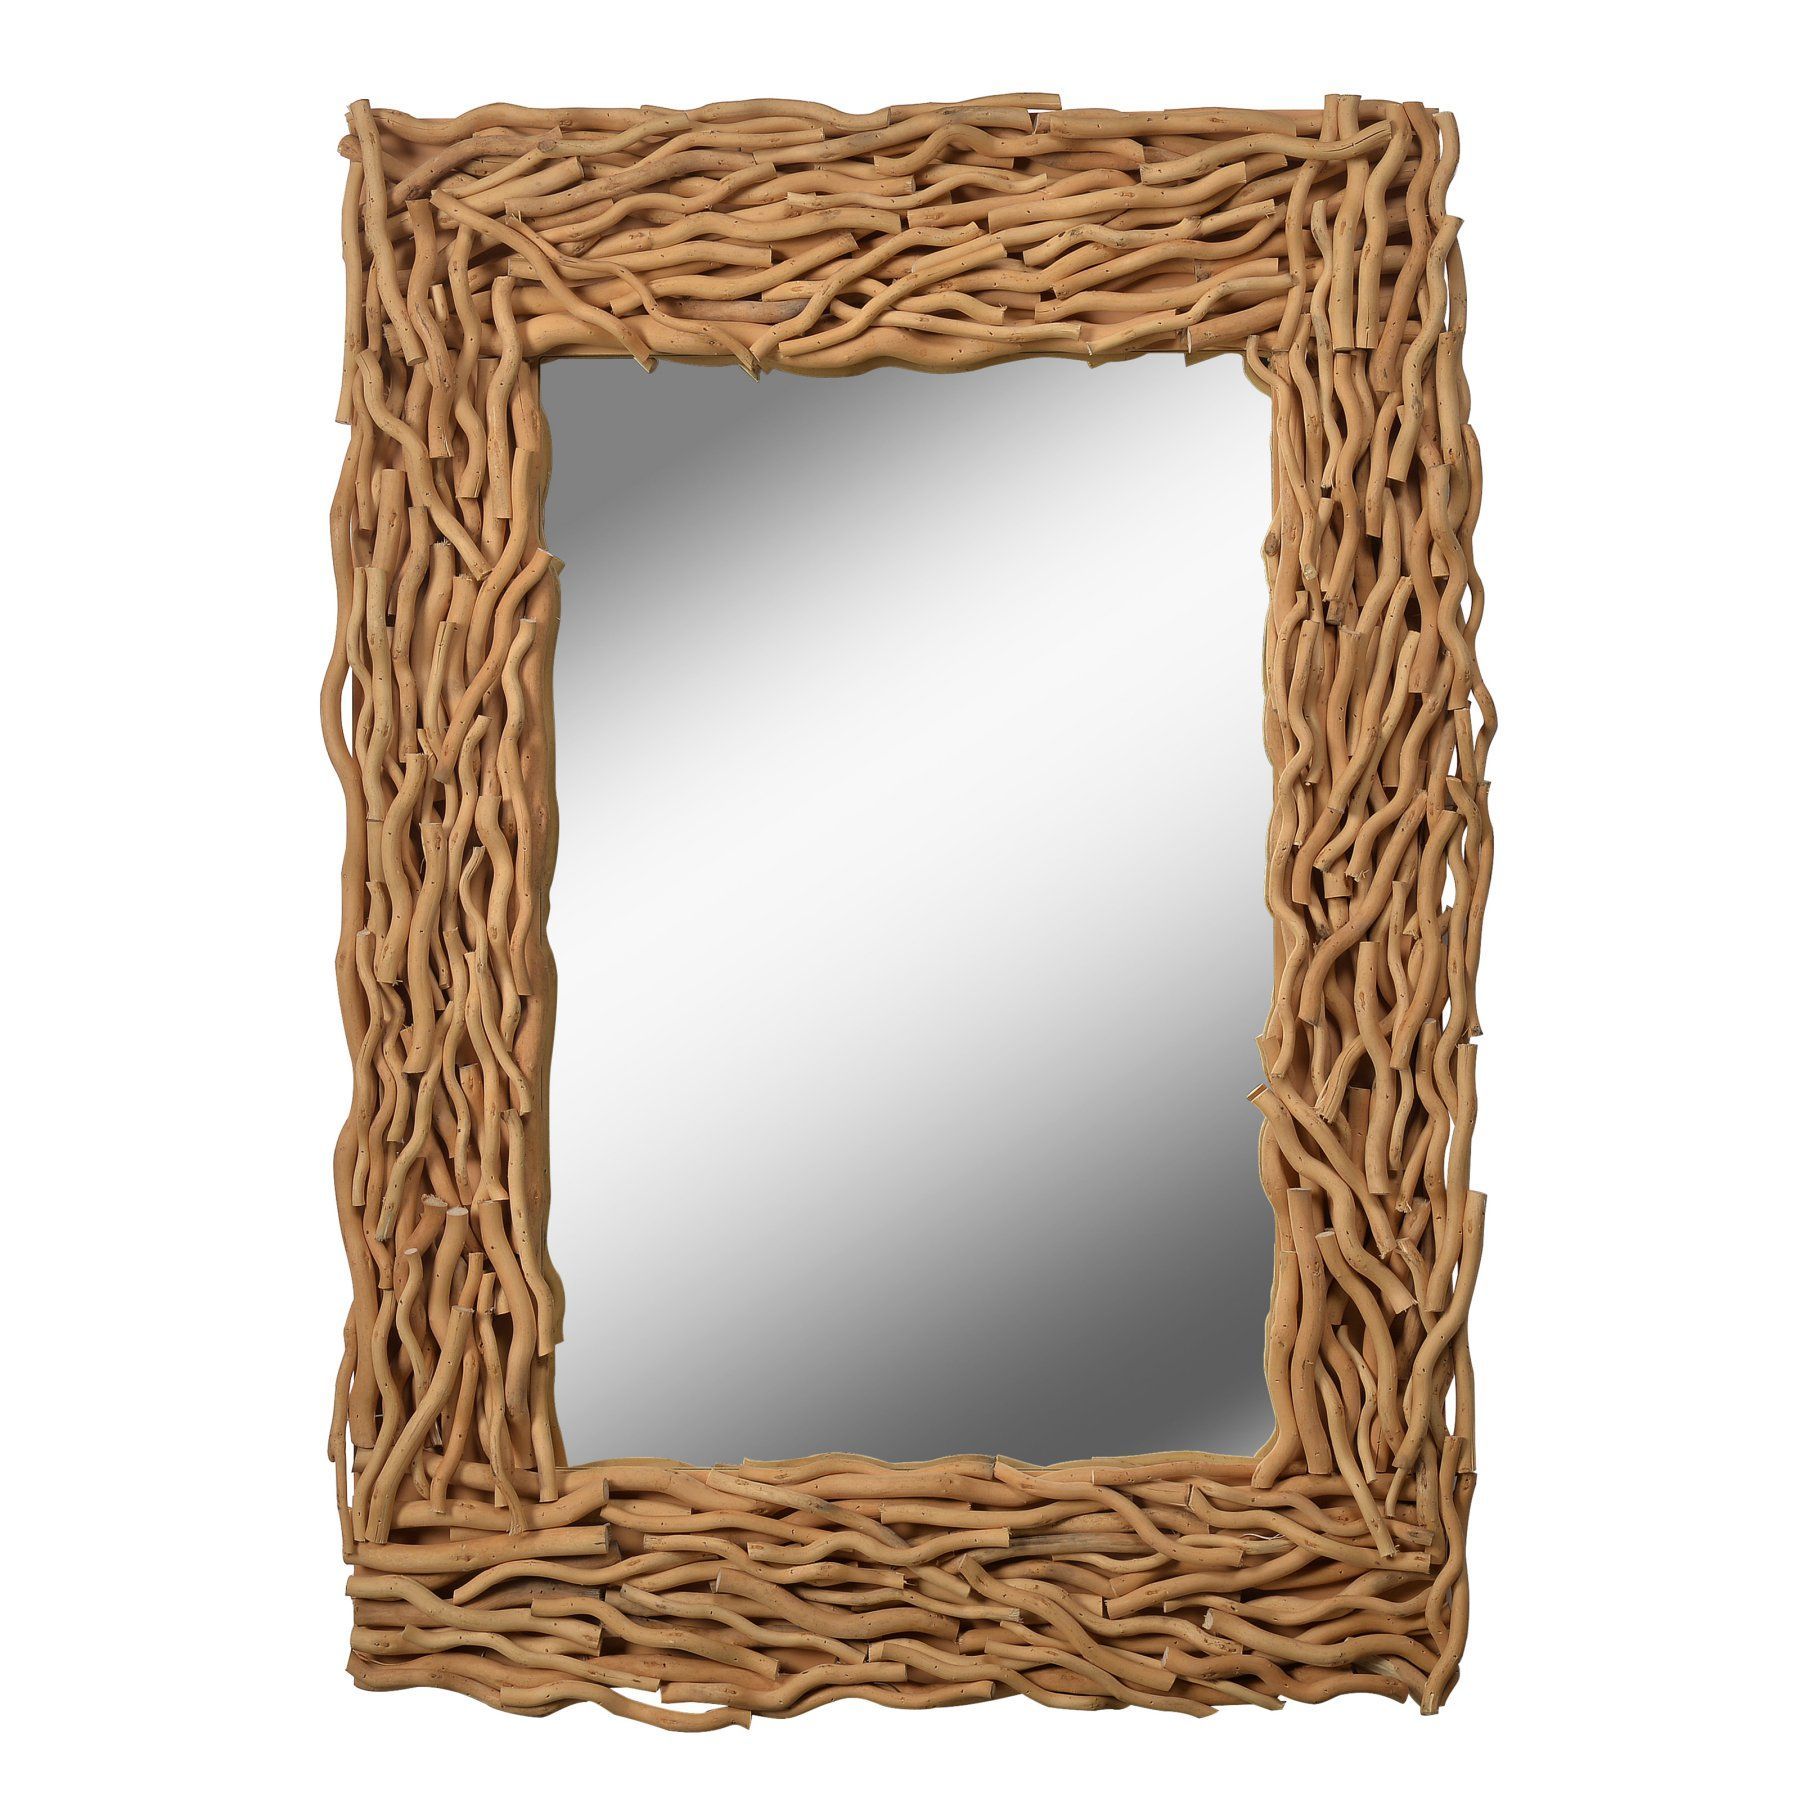 Kenroy Home Thistle Wall Mirror – 26w X 37h In. | Rectangular Bathroom Inside Cromartie Tree Branch Wall Mirrors (Photo 5 of 15)